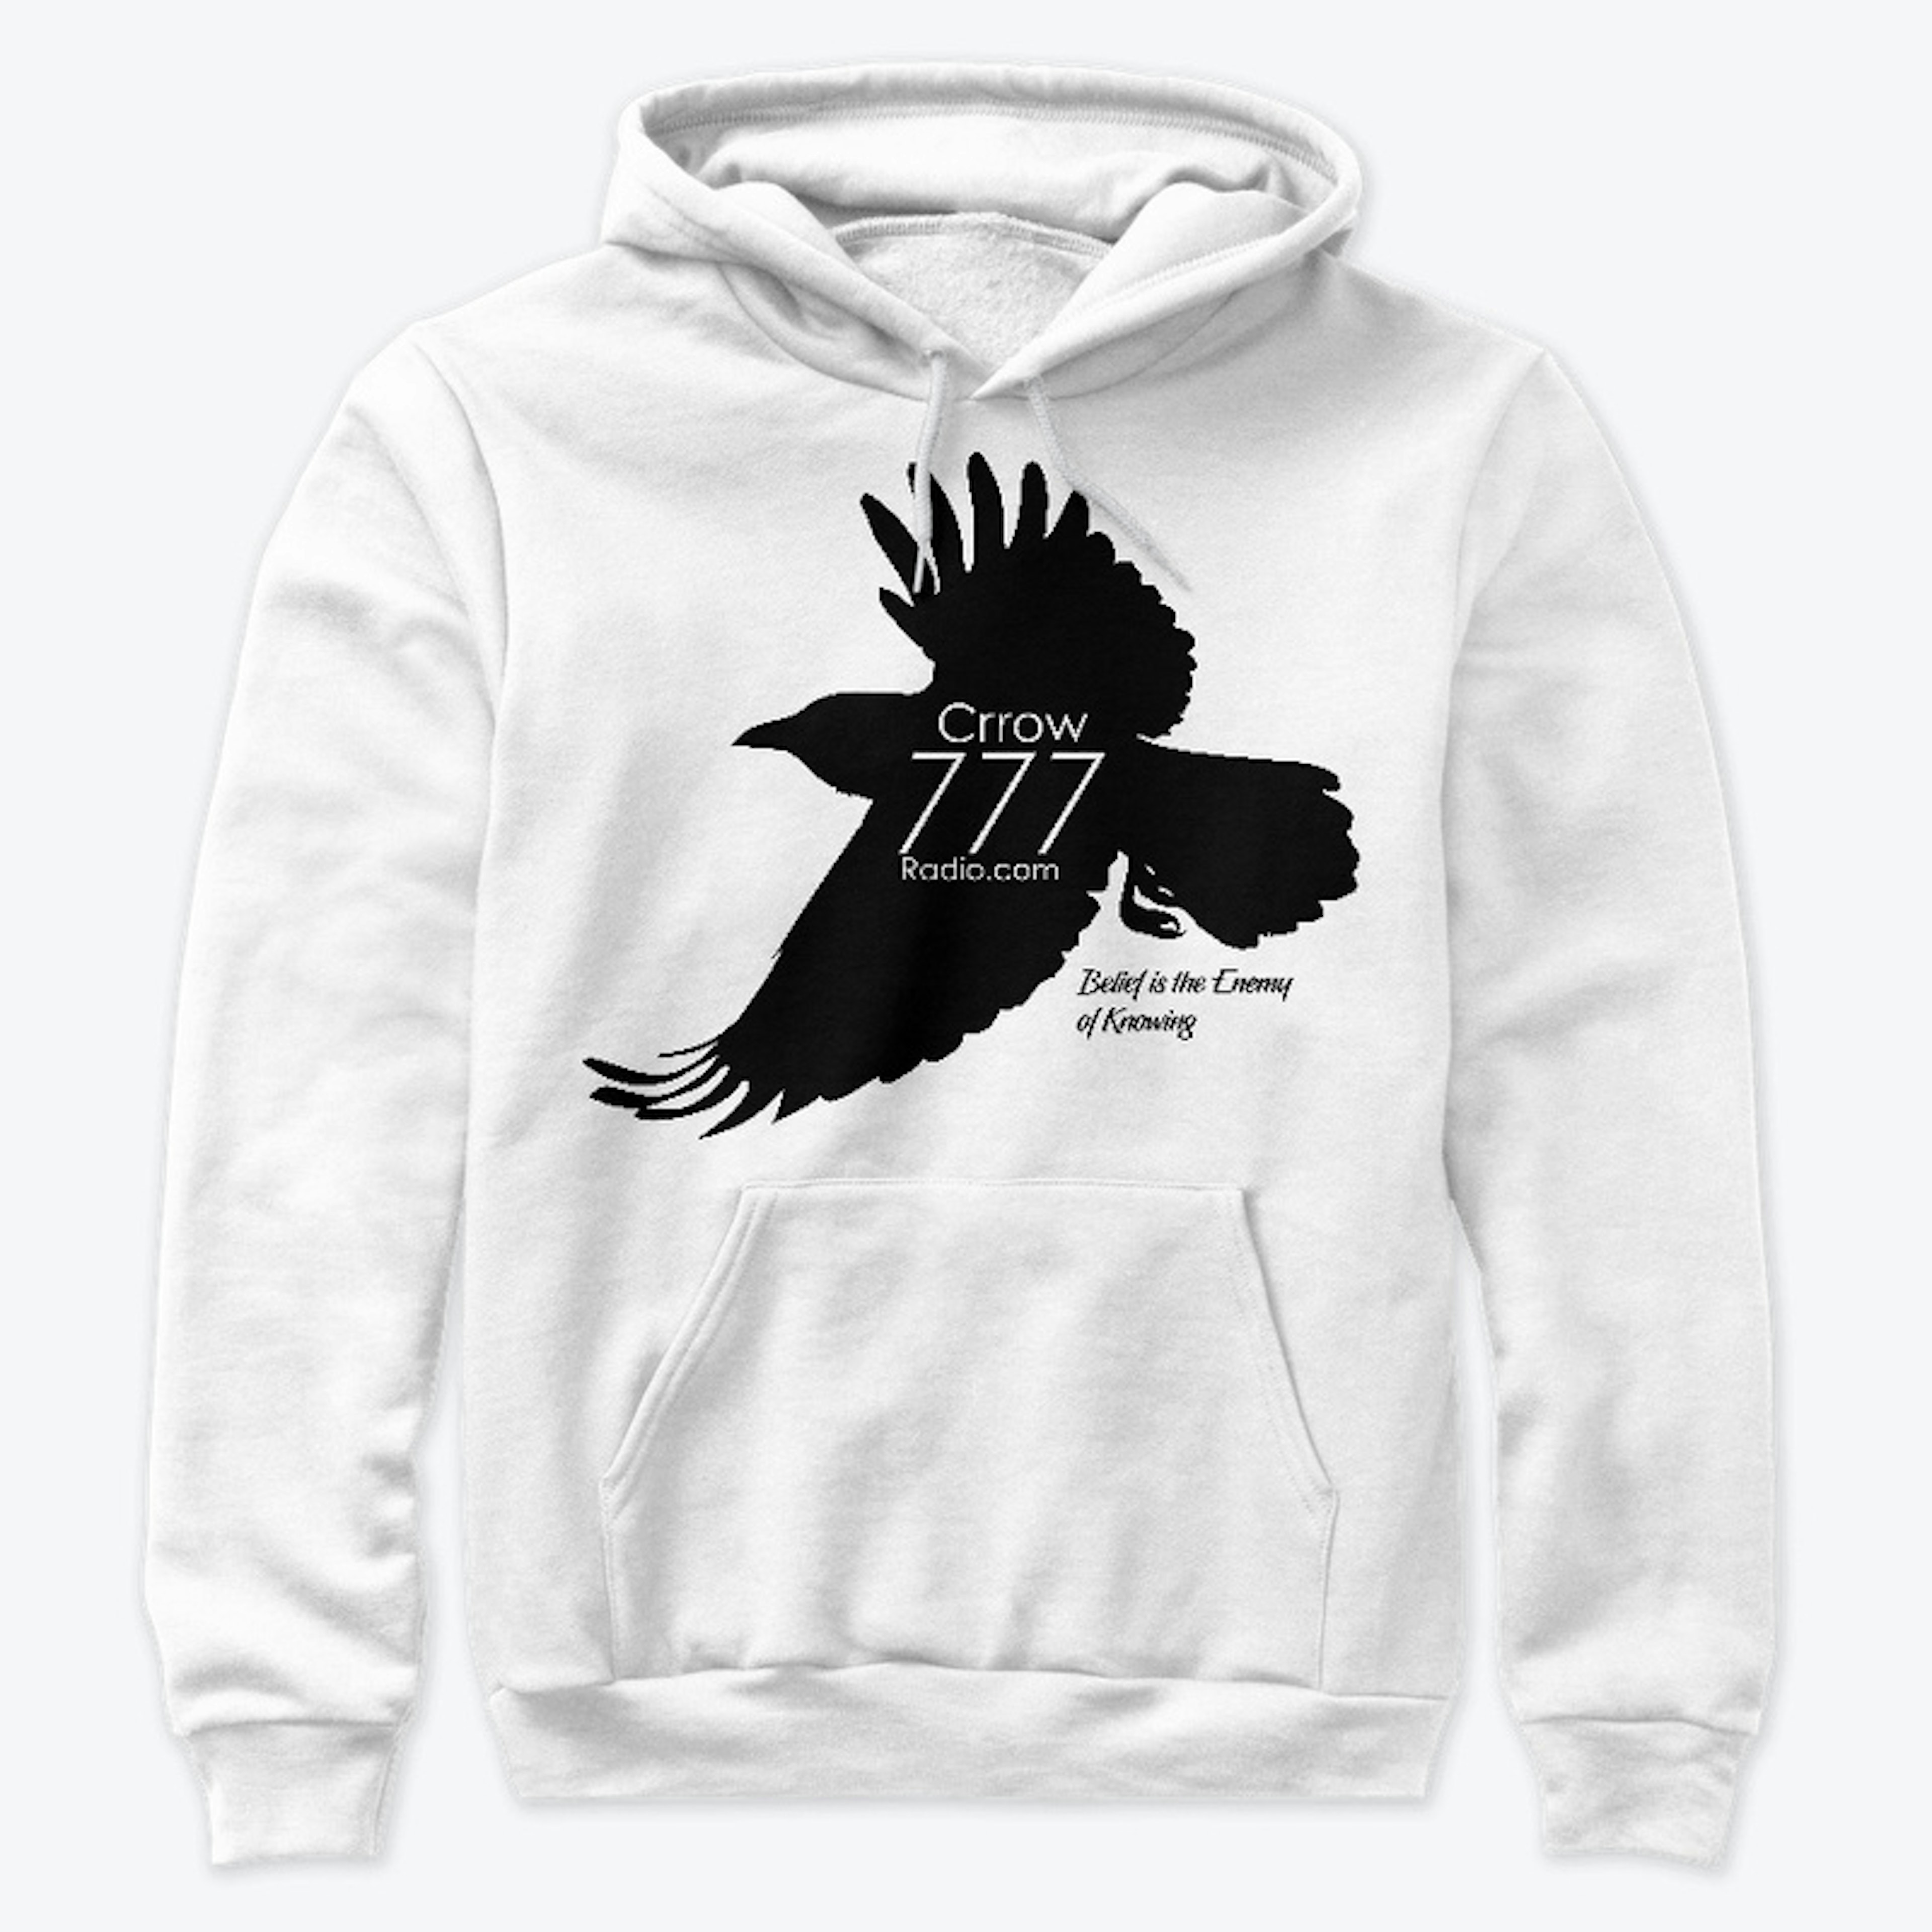 Crrow777 Hoodie Design 1 for Subscribers